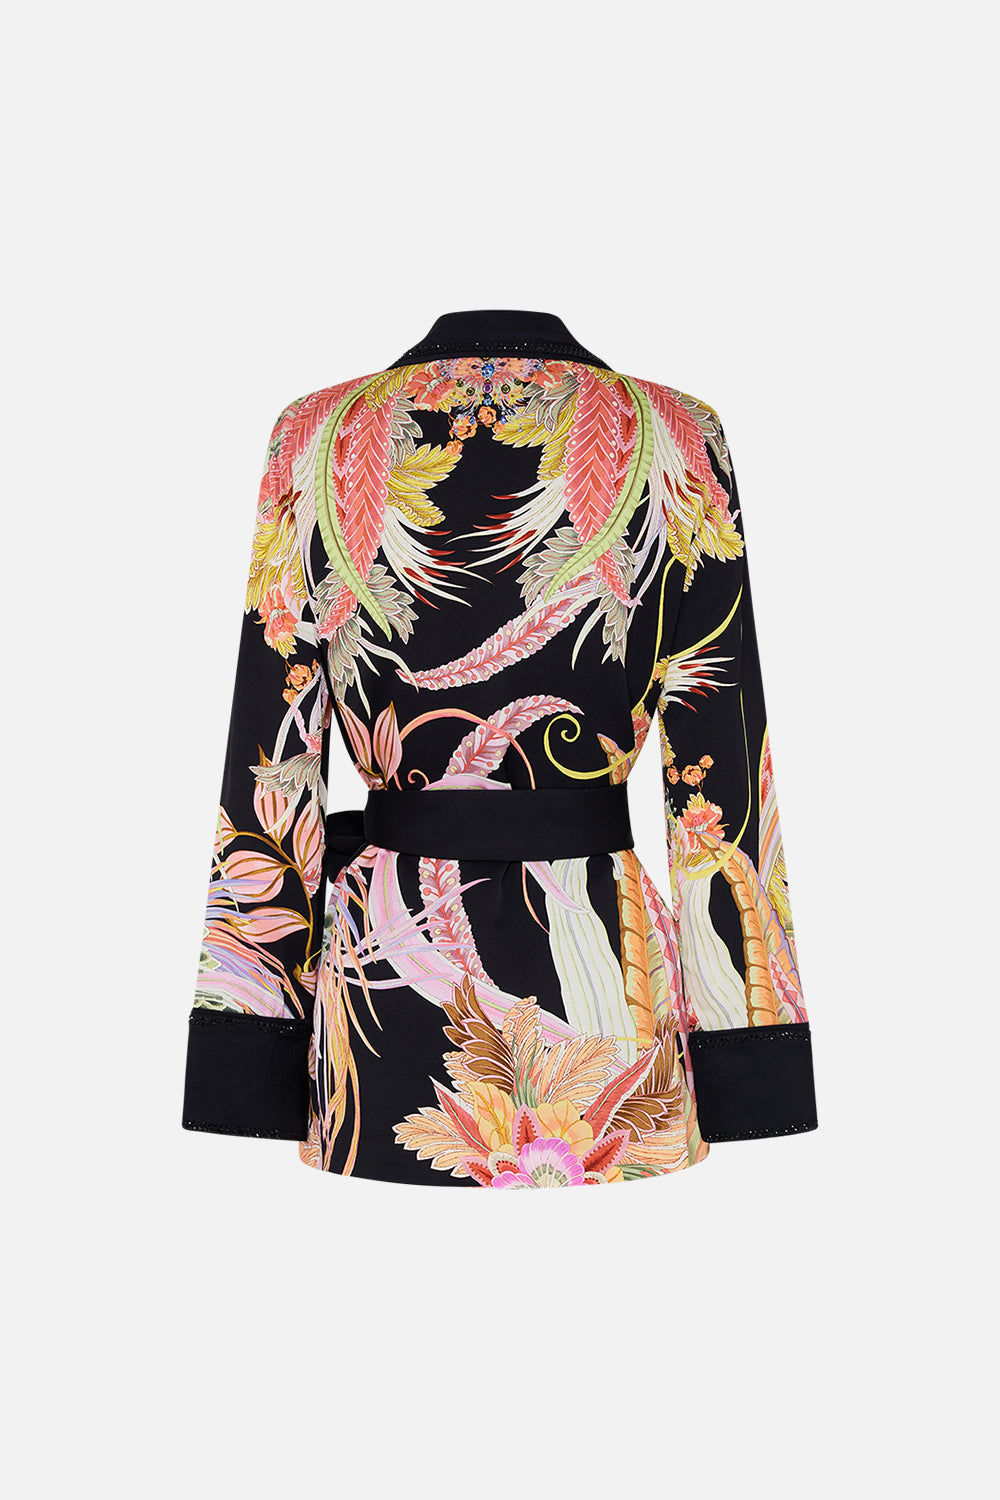 CAMILLA deisgner jacket in lady of The Moon Print